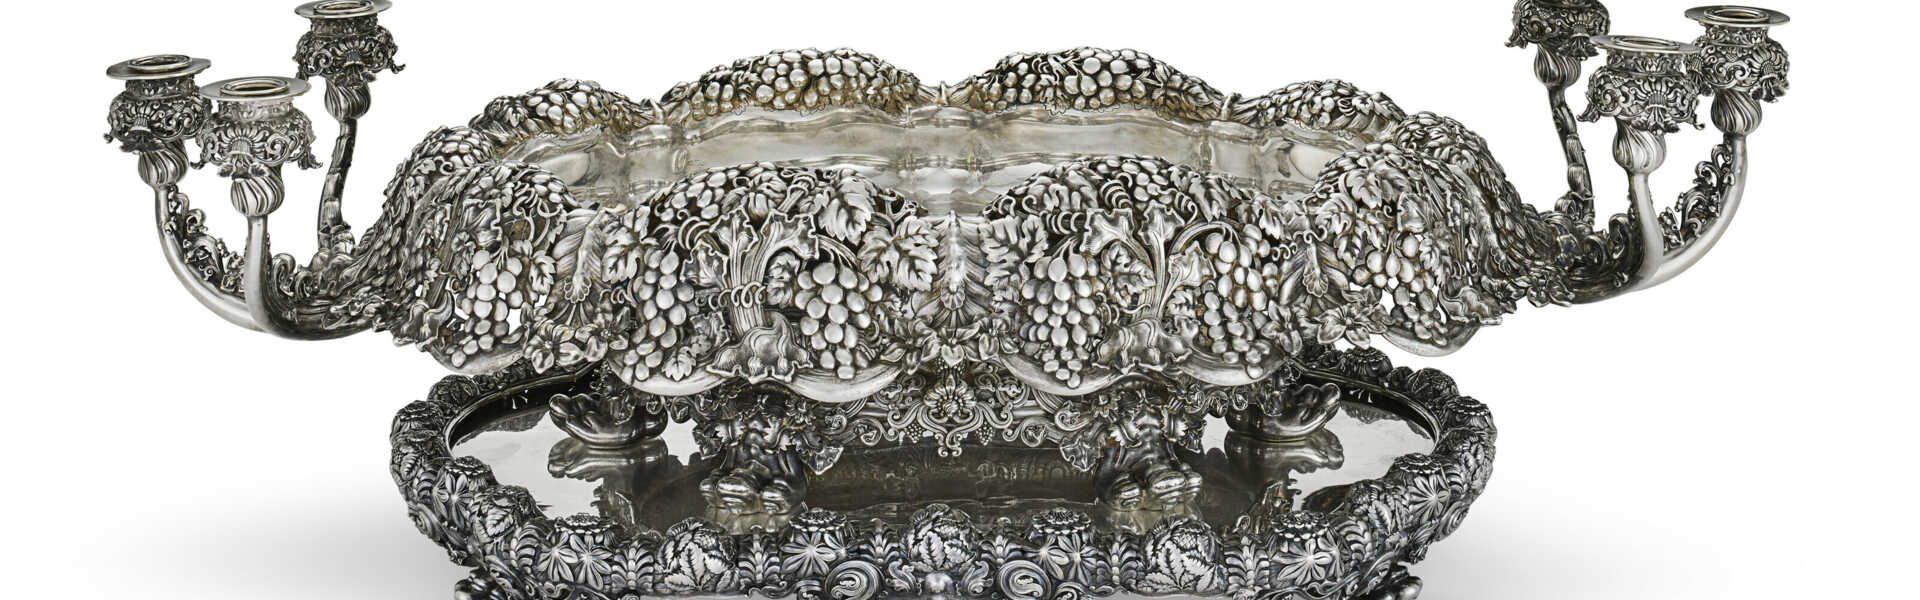 THE HOPKINS-SEARLES CENTERPIECE: AN IMPORTANT AMERICAN SILVER SIX-LIGHT CANDELABRA CENTERPIECE BOWL AND MIRROR PLATEAU